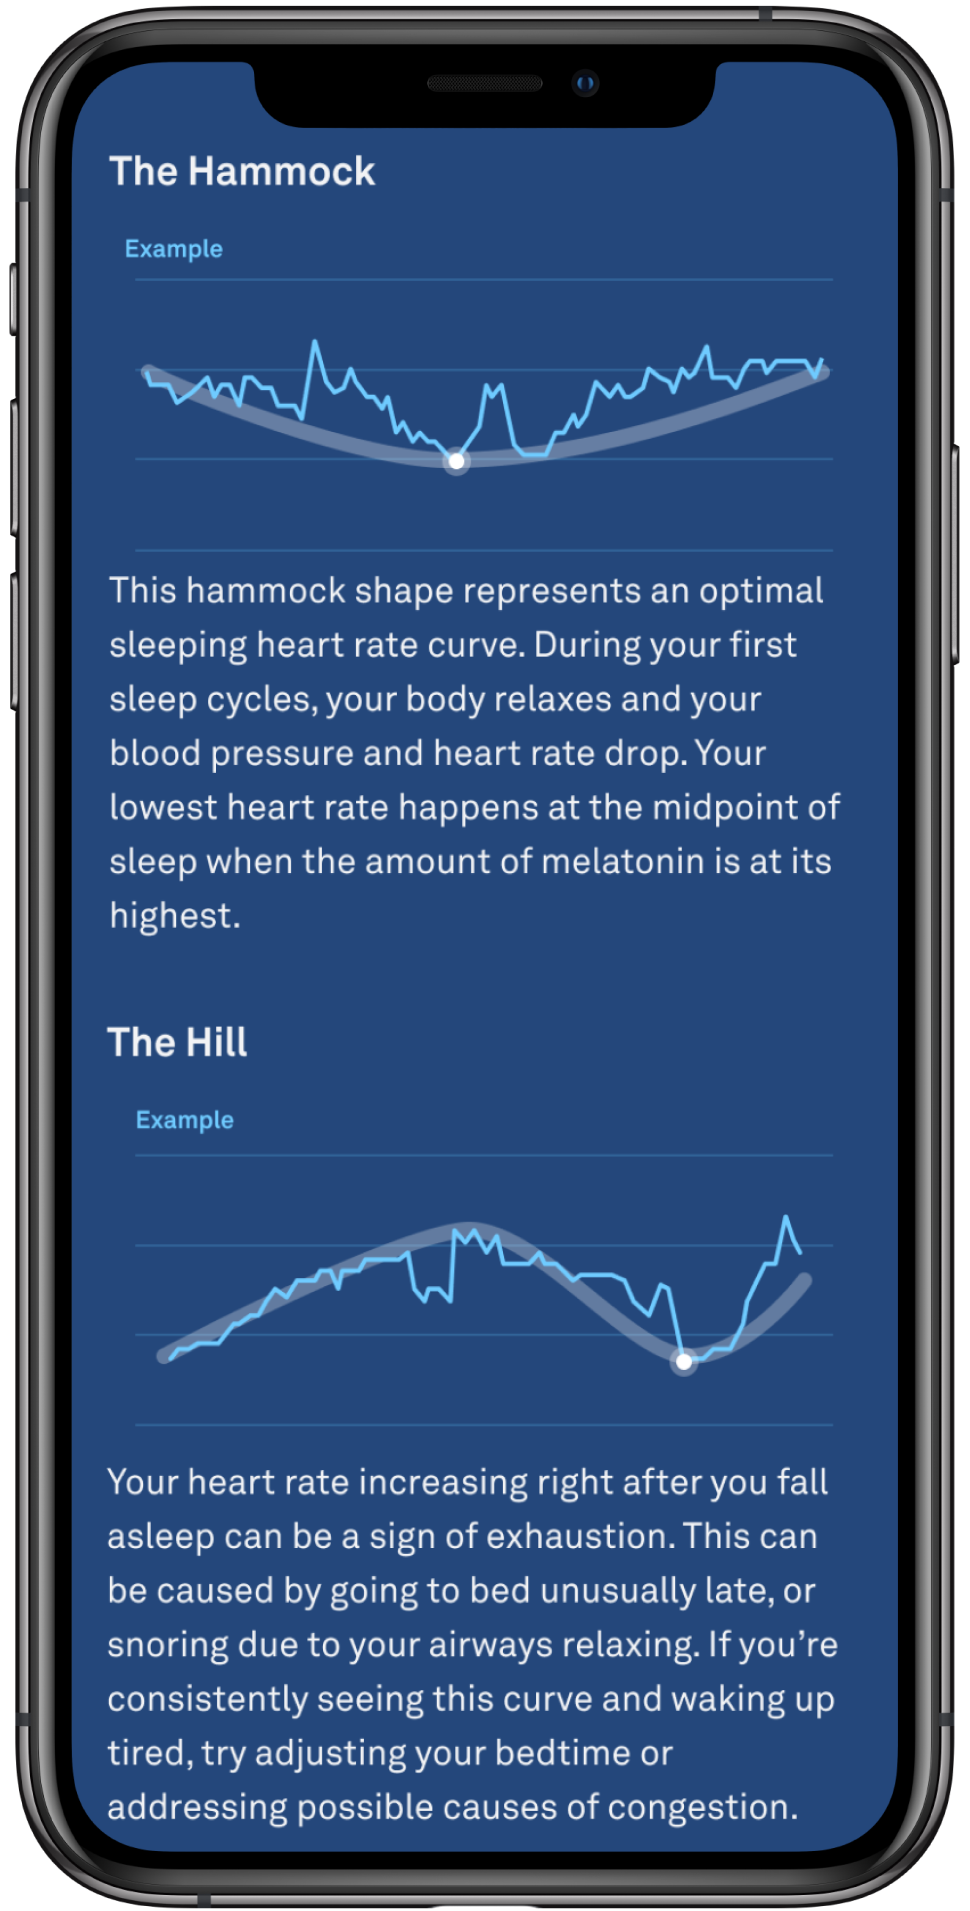 a screenshot of the app showing examples of the hammock and the hill heart rate curves